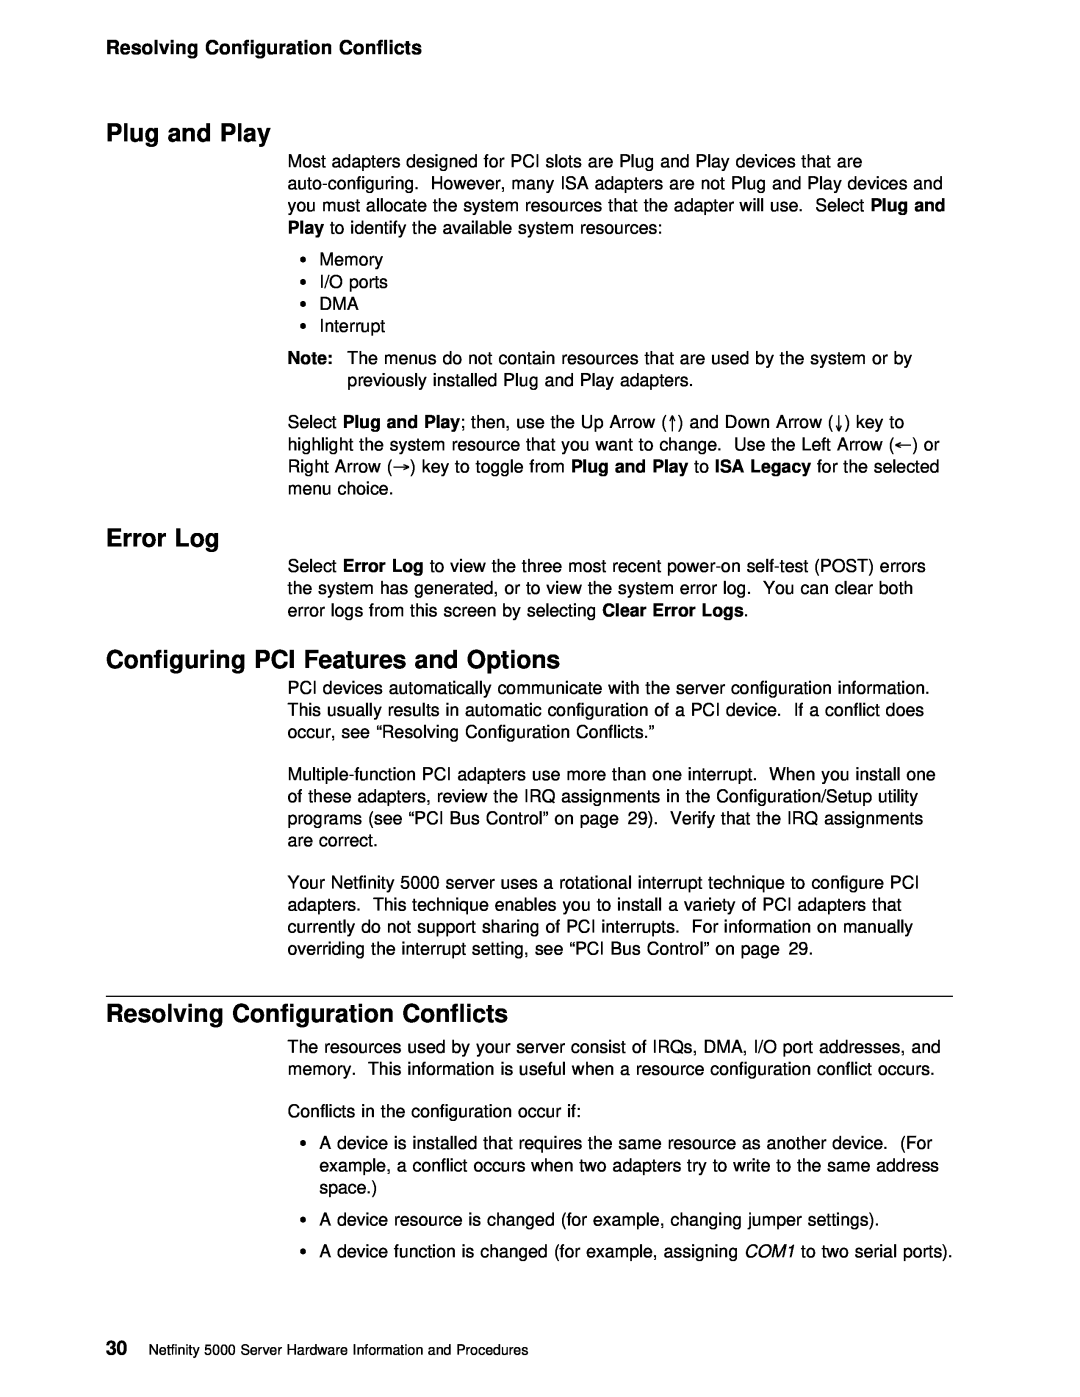 IBM 5000 manual Plug and Play, Error Log, Options, Resolving Configuration Conflicts 